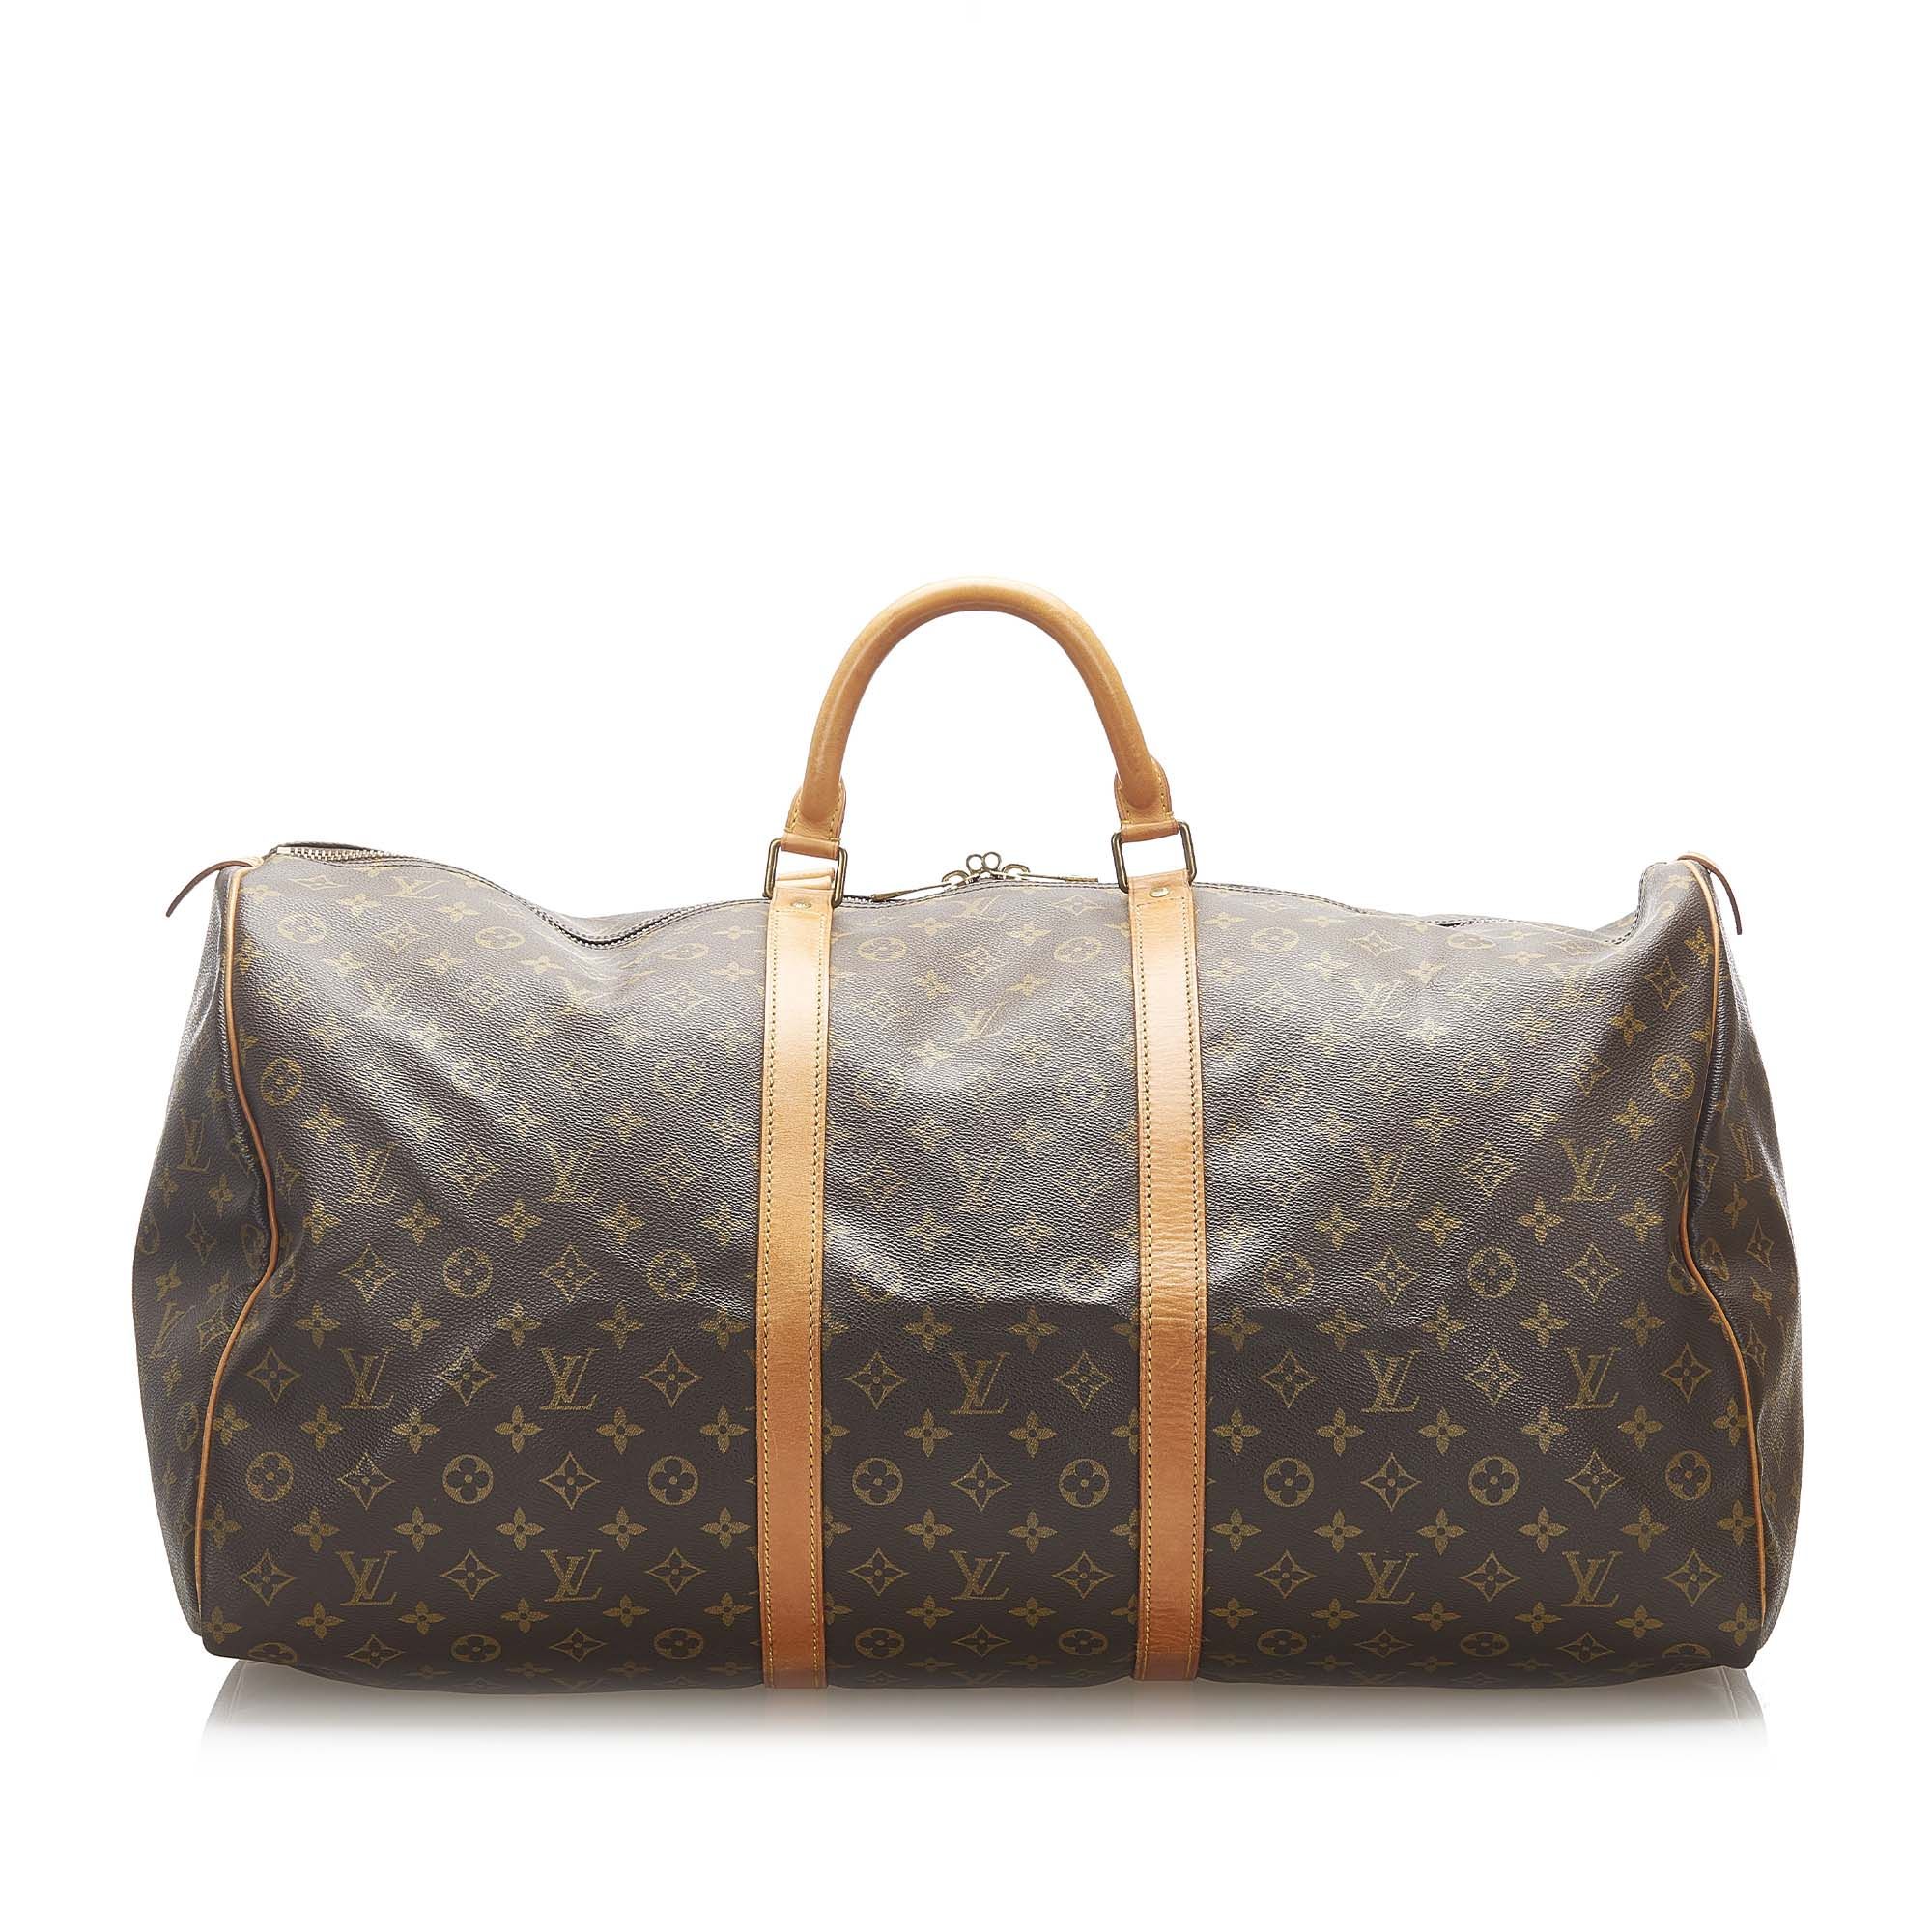 VINTAGE. RRP AS NEW. The Keepall 60 features the Monogram canvas body with vachetta trim, a rolled vachetta handles, and a two-way top zip closure.Exterior back is discolored. Exterior bottom is discolored. Exterior corners is discolored and scratched. Exterior front is discolored. Exterior handle is discolored. Exterior side is discolored. Buckle is scratched and tarnished. Zipper is scratched and tarnished.

Dimensions:
Length 32cm
Width 60cm
Depth 26cm
Shoulder Drop 9cm

Original Accessories: This item has no other original accessories.

Serial Number: VI 864
Color: Brown
Material: Canvas x Monogram Canvas x Leather x Vachetta Leather
Country of Origin: France
Boutique Reference: SSU94323K1342


Product Rating: GoodCondition